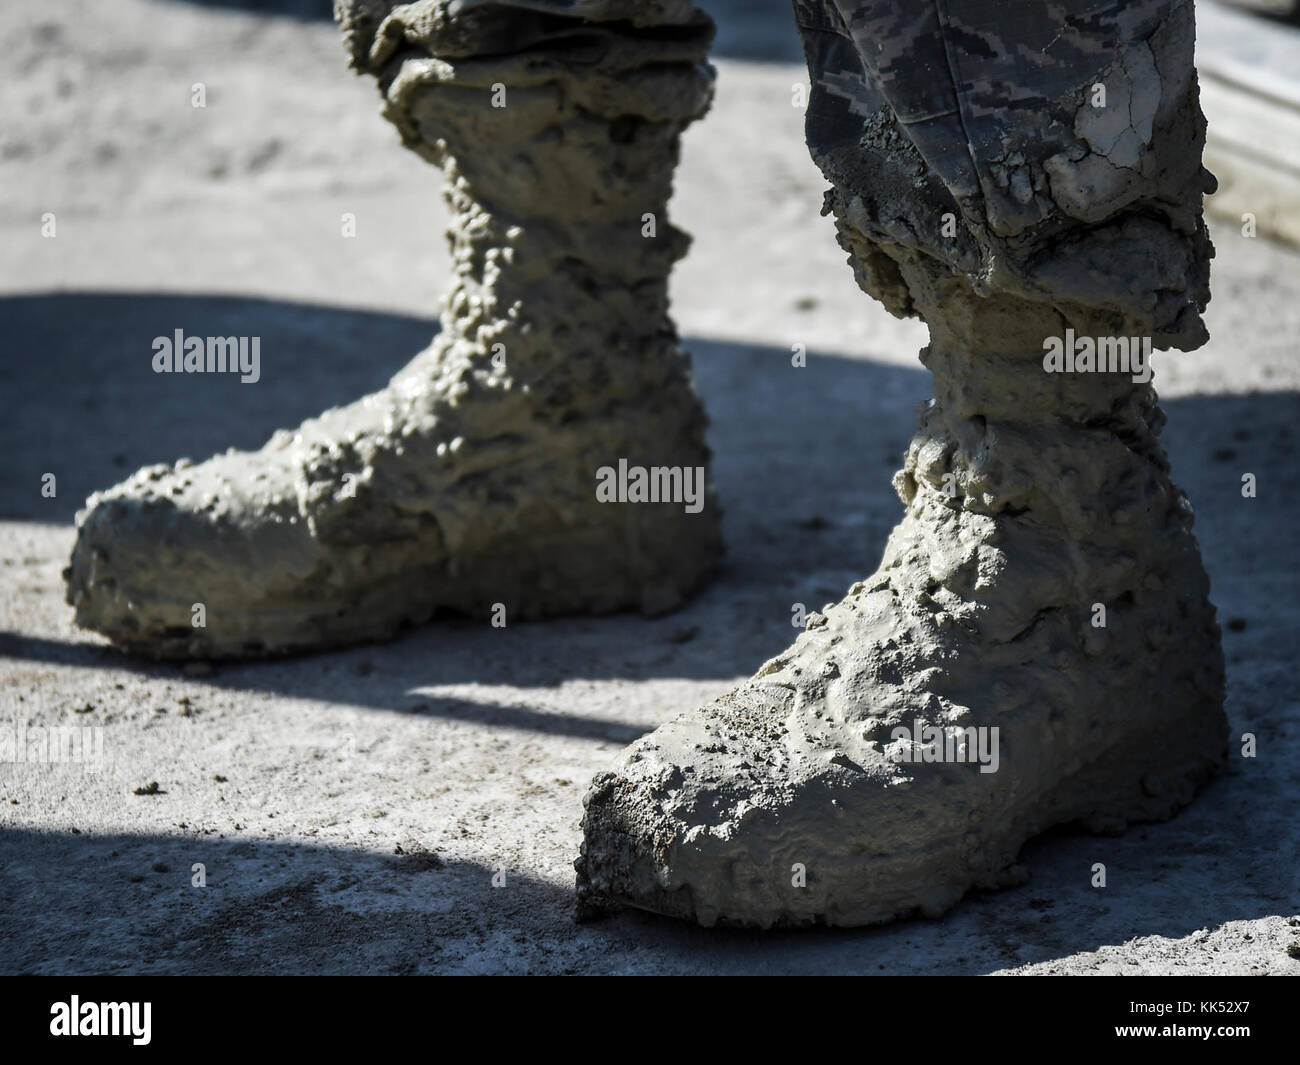 Concrete begins to cure on the boots of U.S. Air Force Airman 1st Class  Ryan Williams, 773d Civil Engineer Squadron, after a Rapid Airfield Damage  Repair training exercise at Gwangju Air Base,